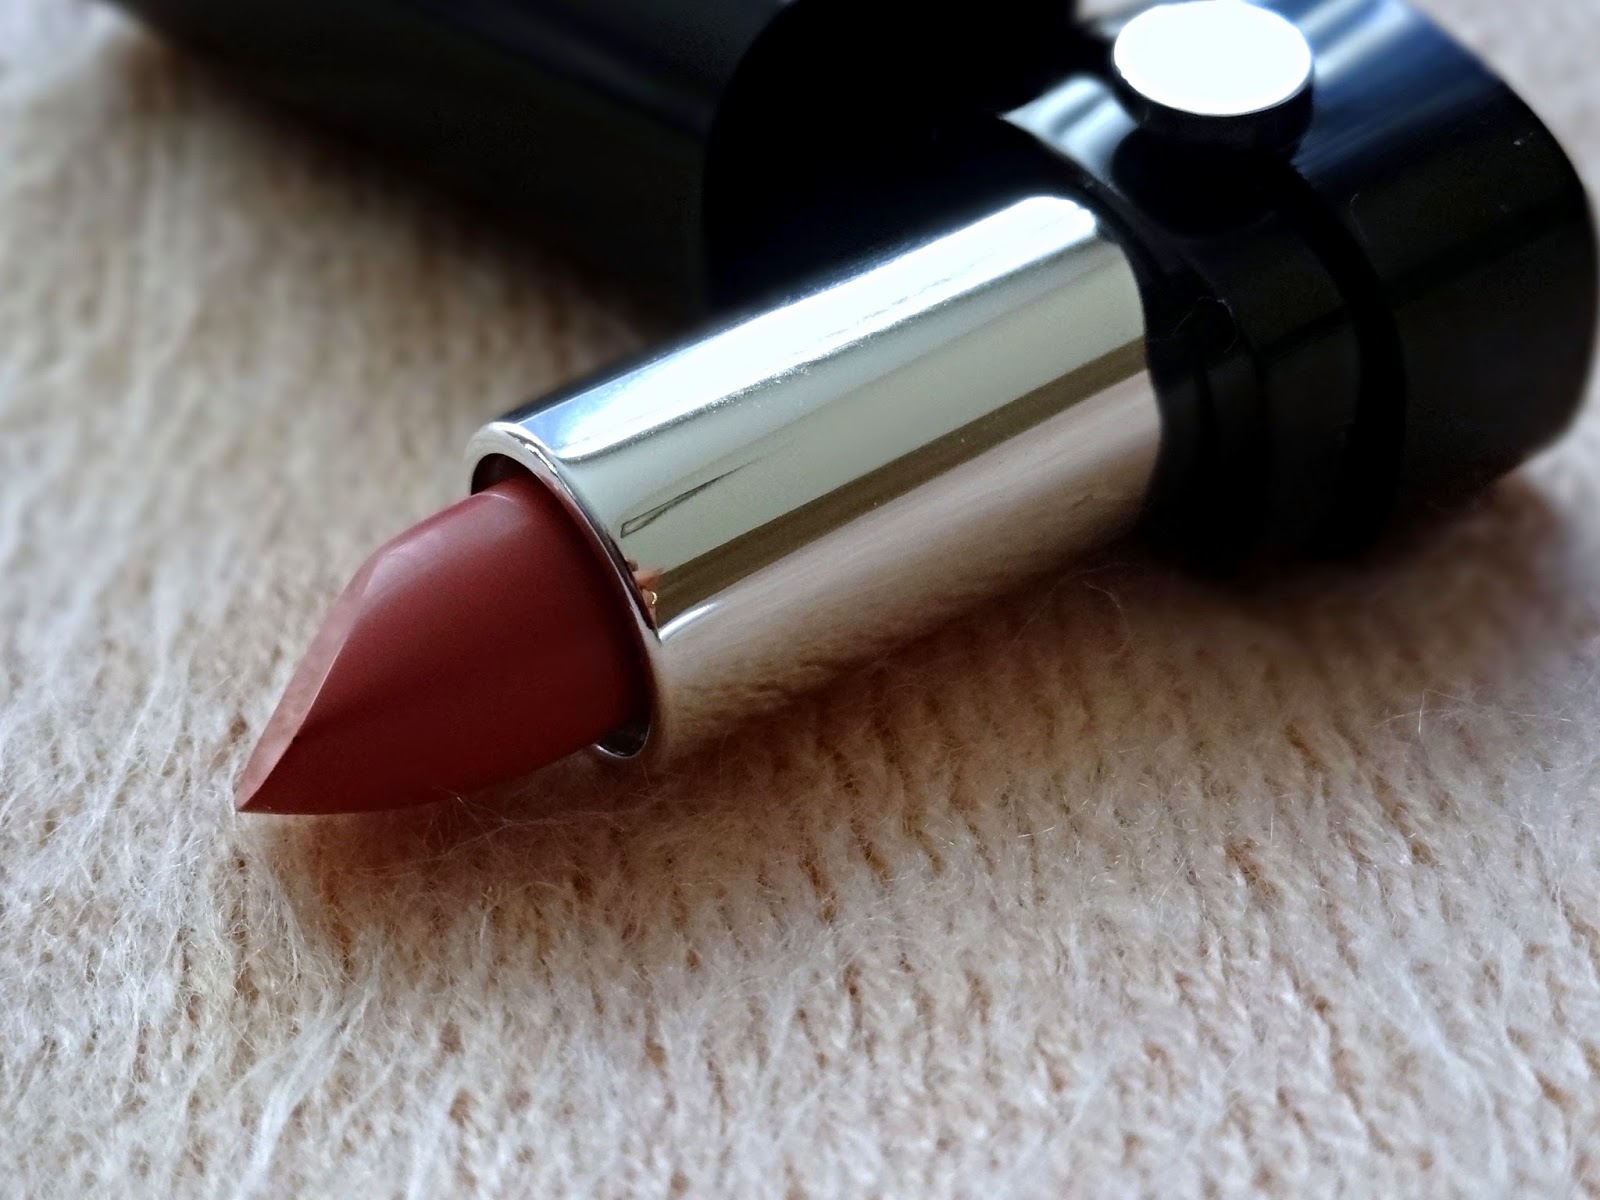 Marc Jacobs Beauty Le Marc Lip Creme in Kiss Kiss Bang Bang Review, Photos & Swatches